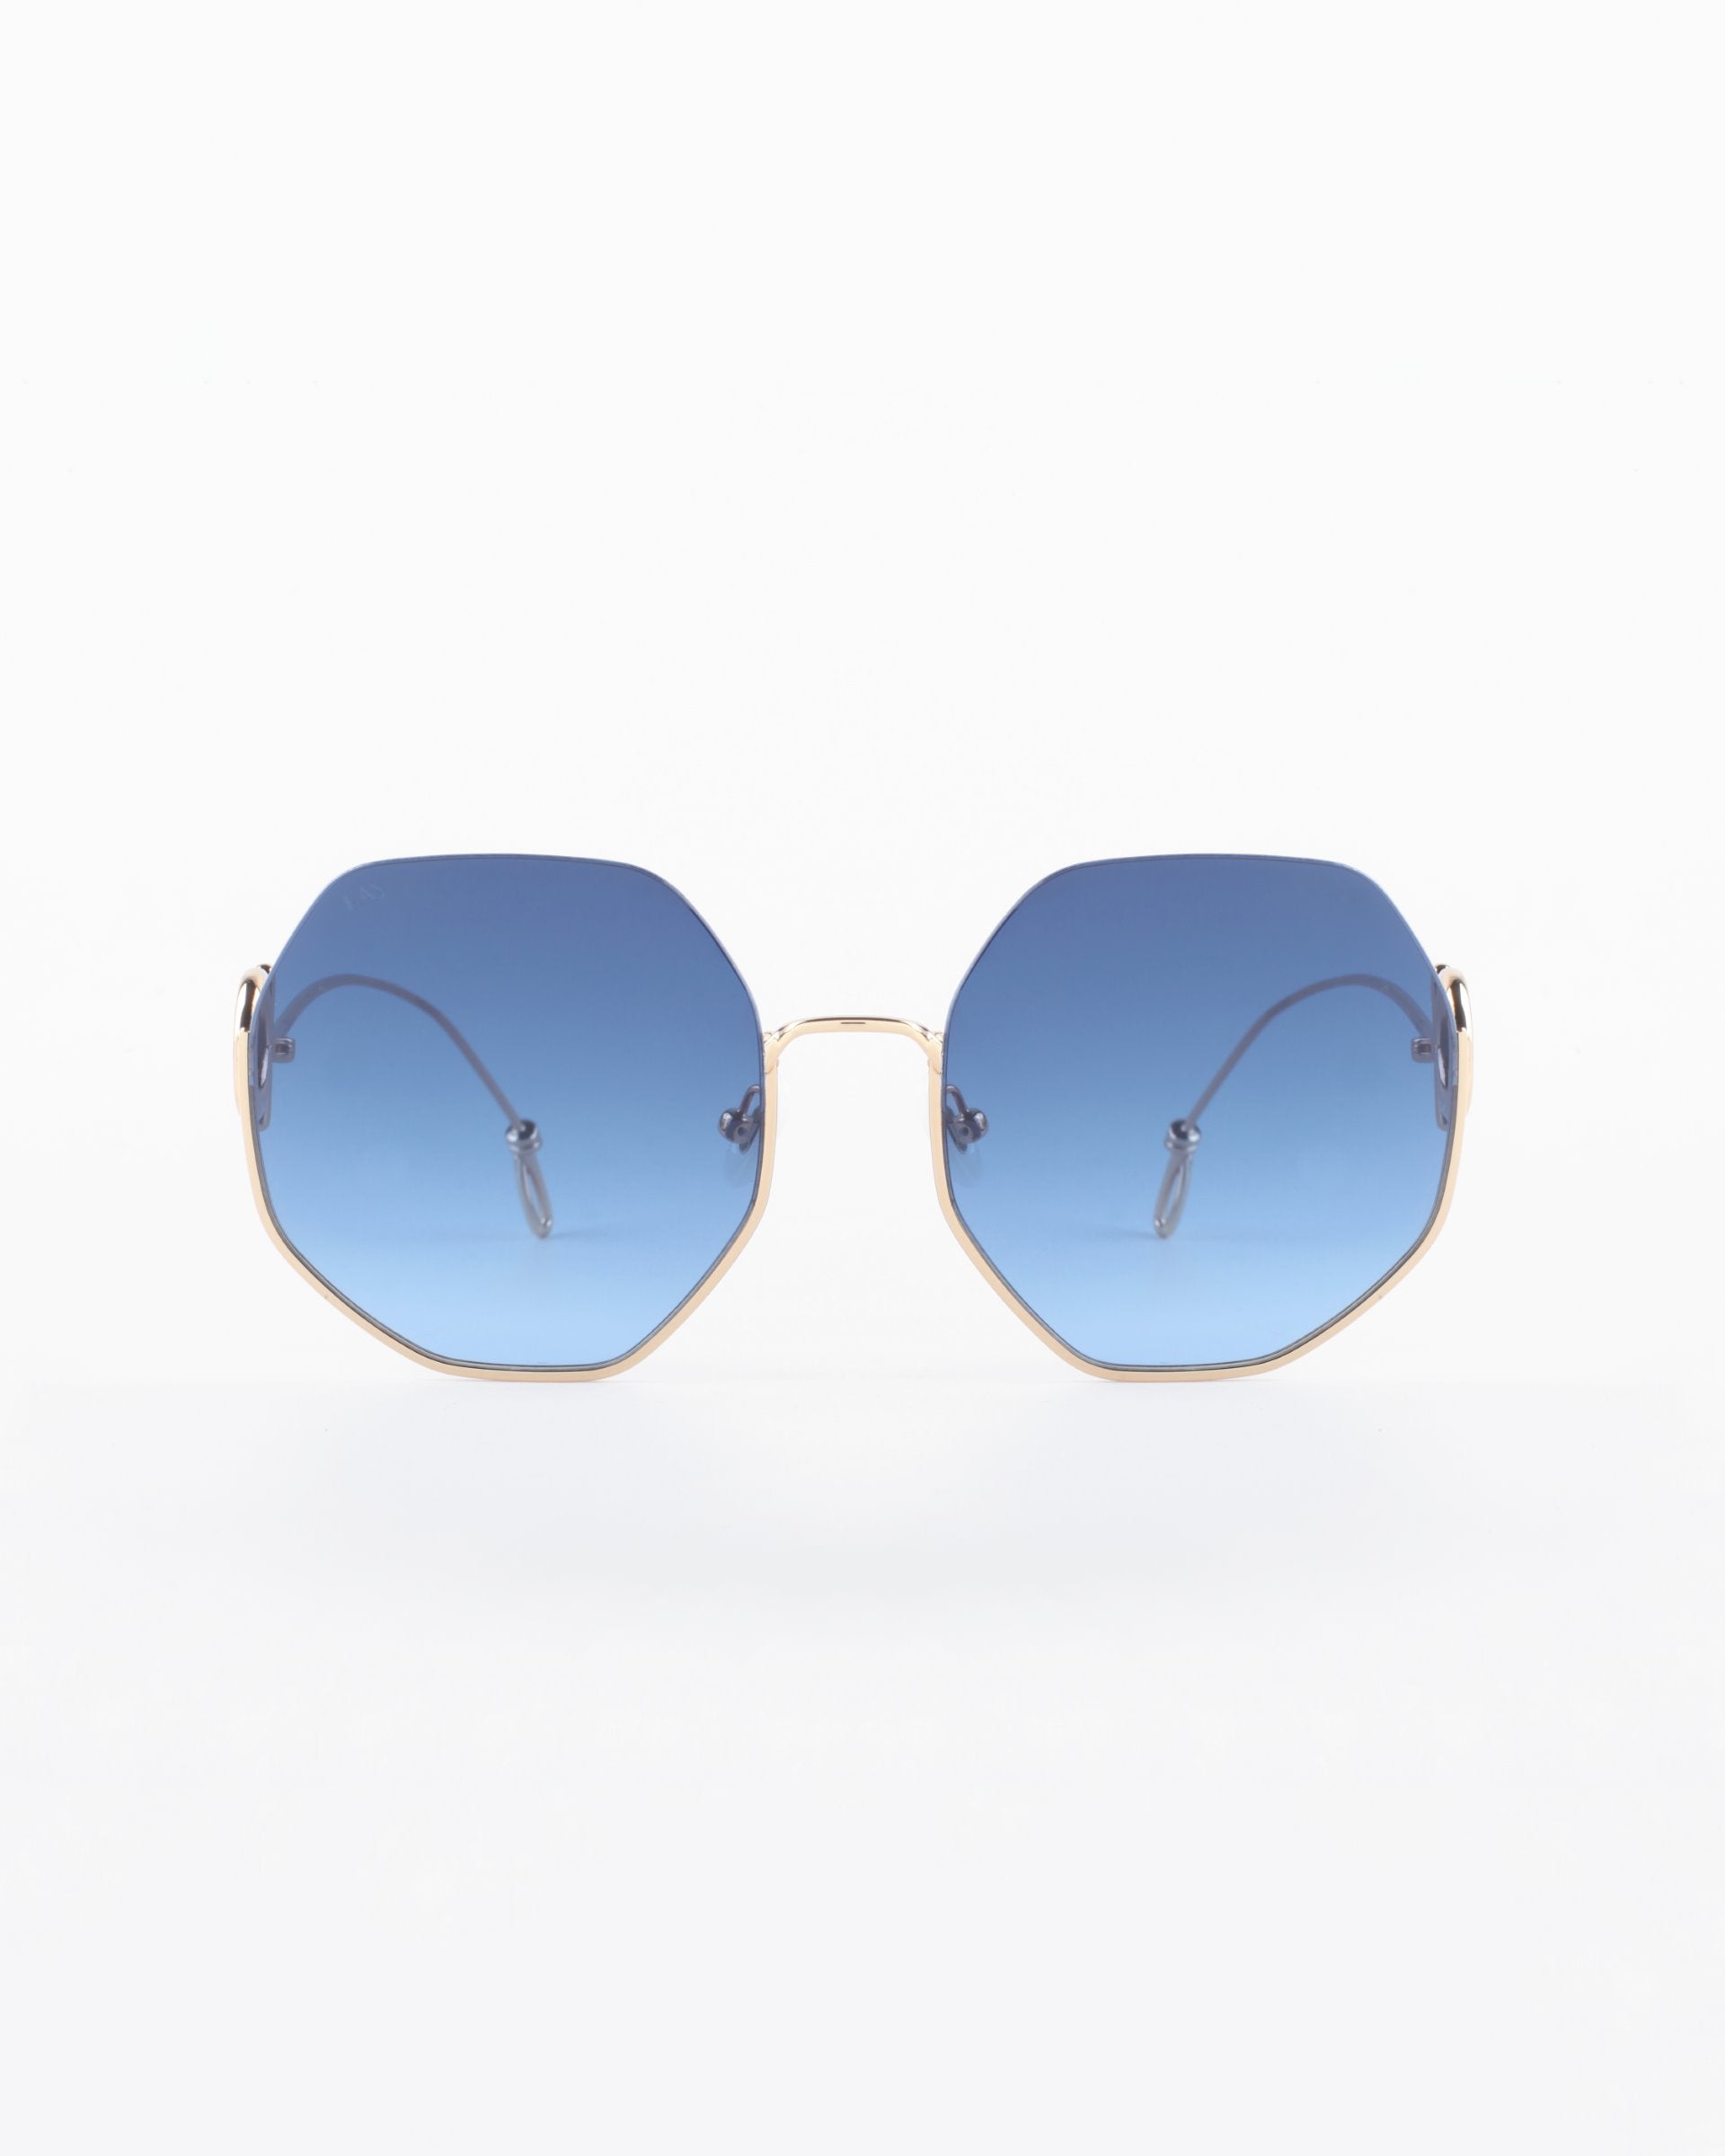 A pair of For Art&#39;s Sake® Palace UVA &amp; UVB-protected sunglasses with 18-karat gold-plated wire frames and blue-tinted hexagonal lenses is centered against a white background. The temples extend from the frames to thin, curved earpieces. The overall design is modern and minimalist.